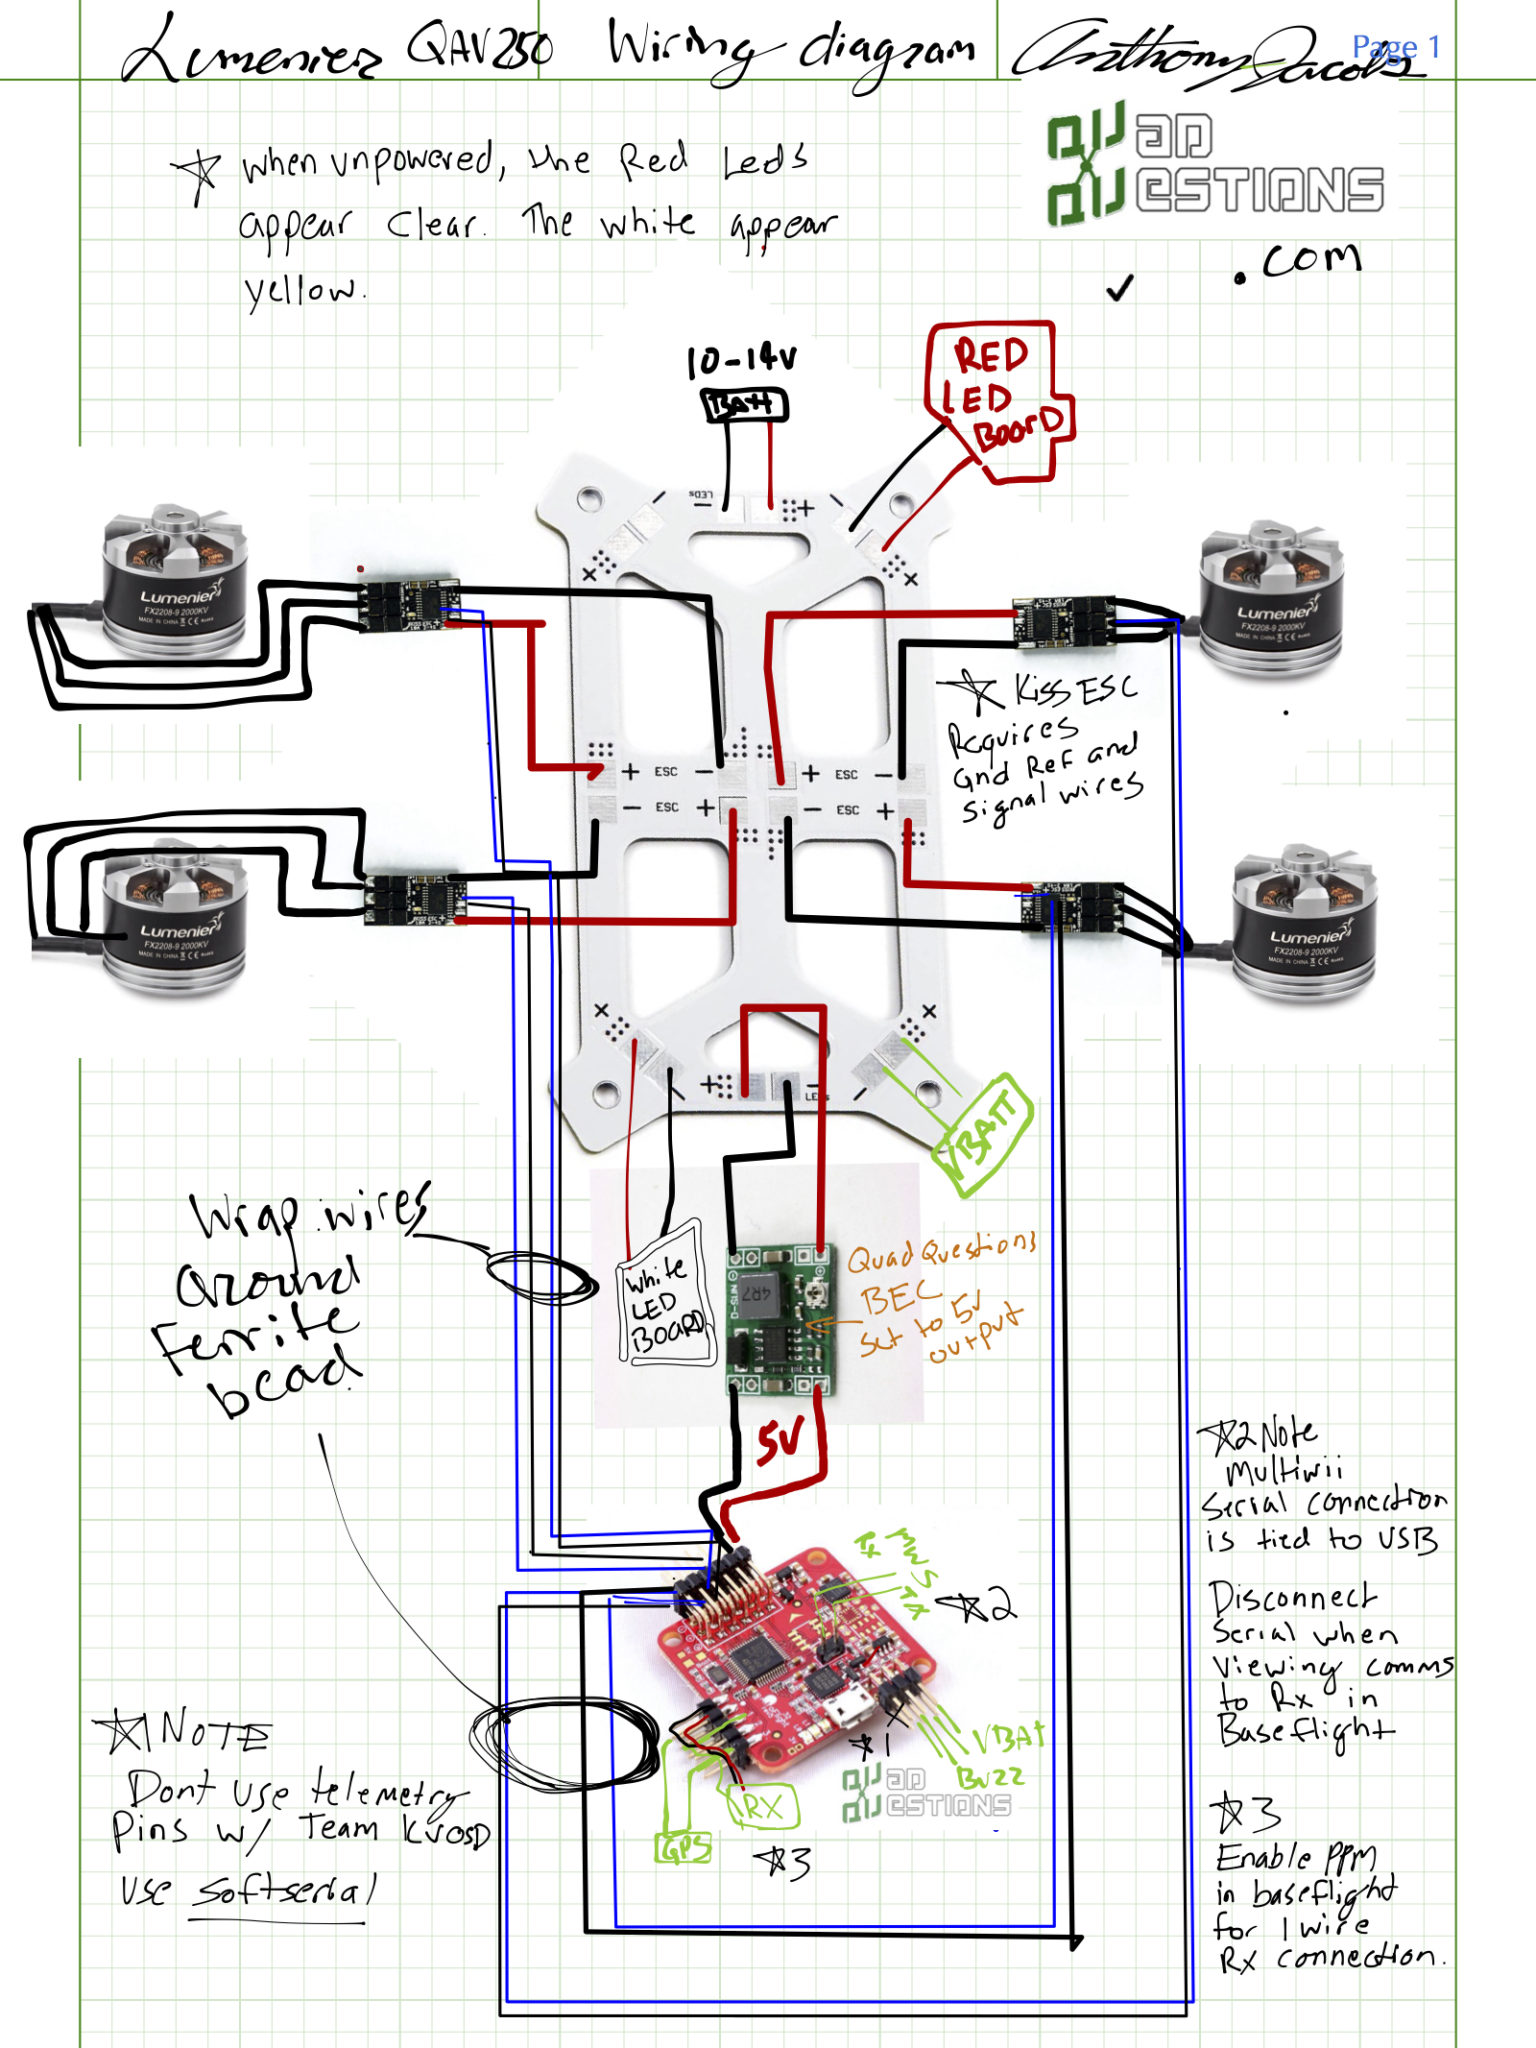 Lumenier QAV250 Wiring diagram for use with Naze32, Kiss Escs, and BEC regulator. You're welcome!